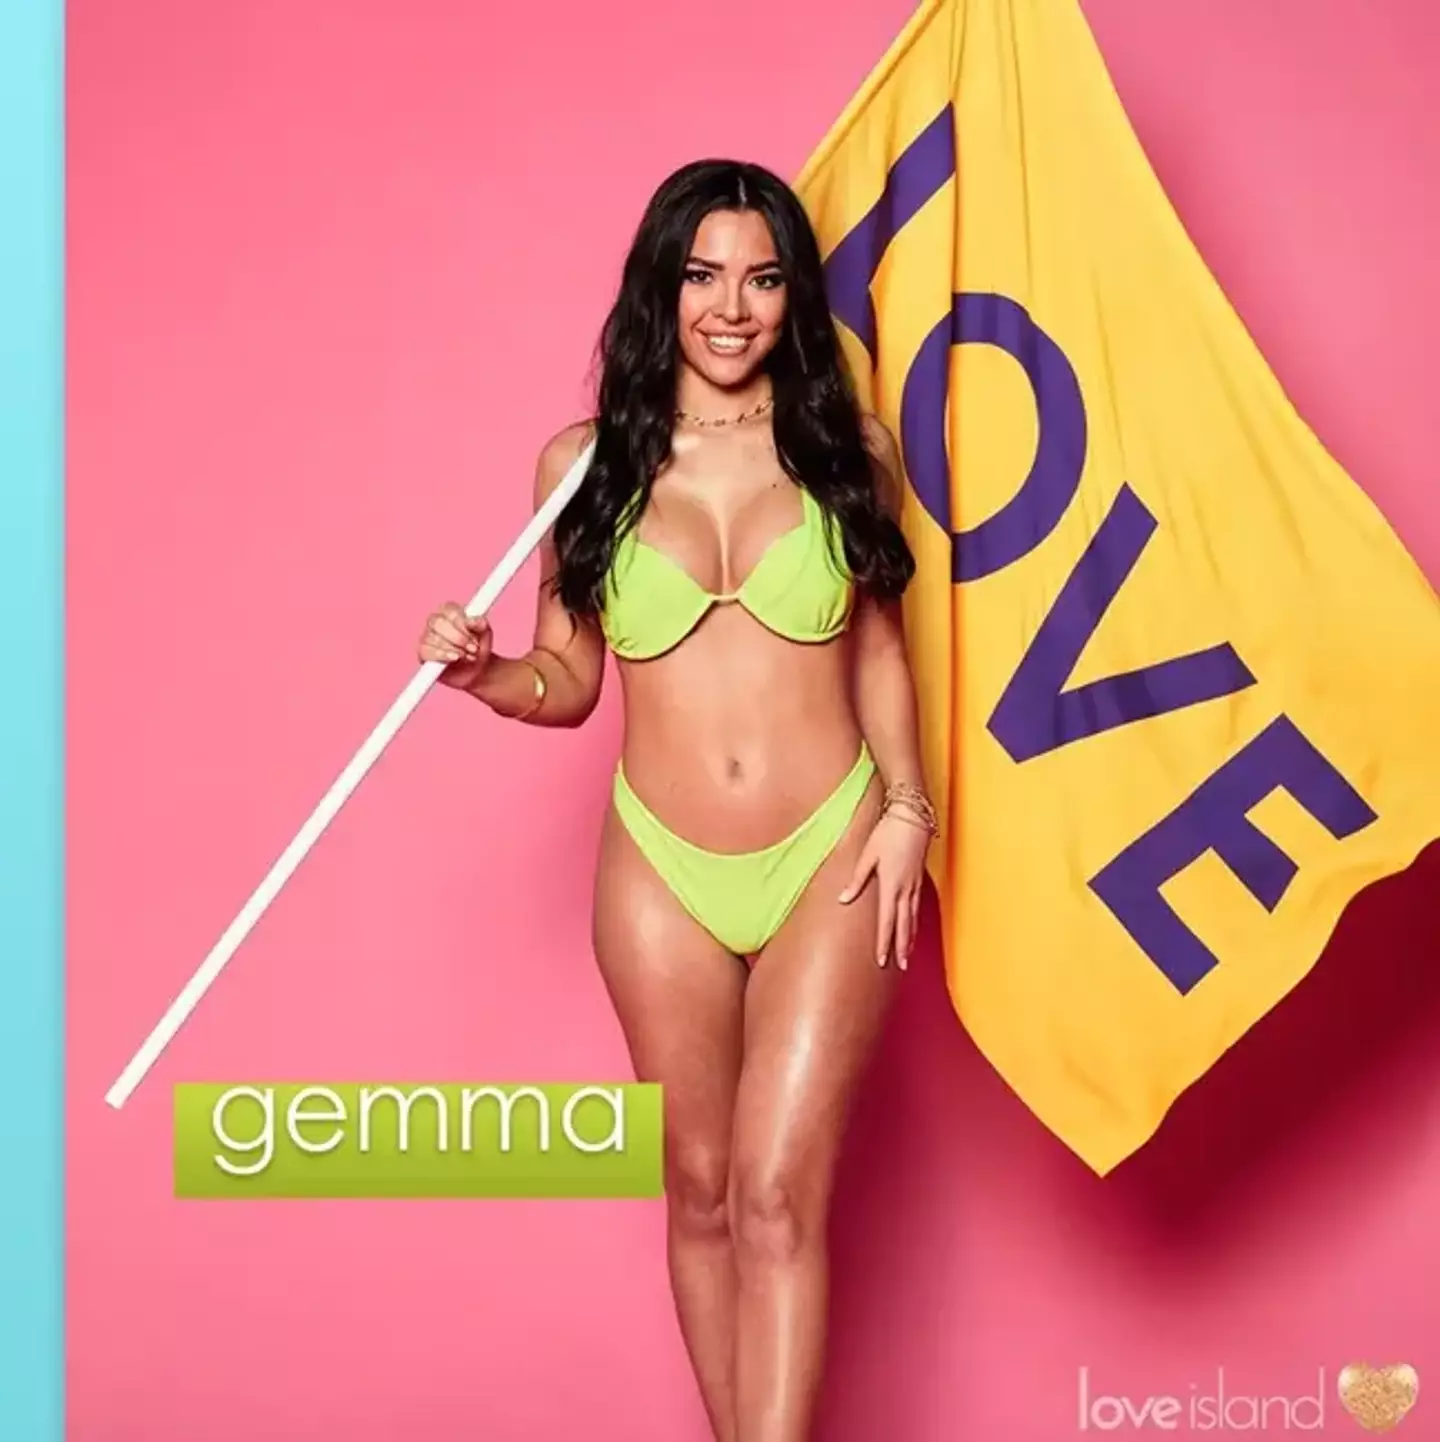 19-year-old Gemma Owen will be appearing on Love Island.